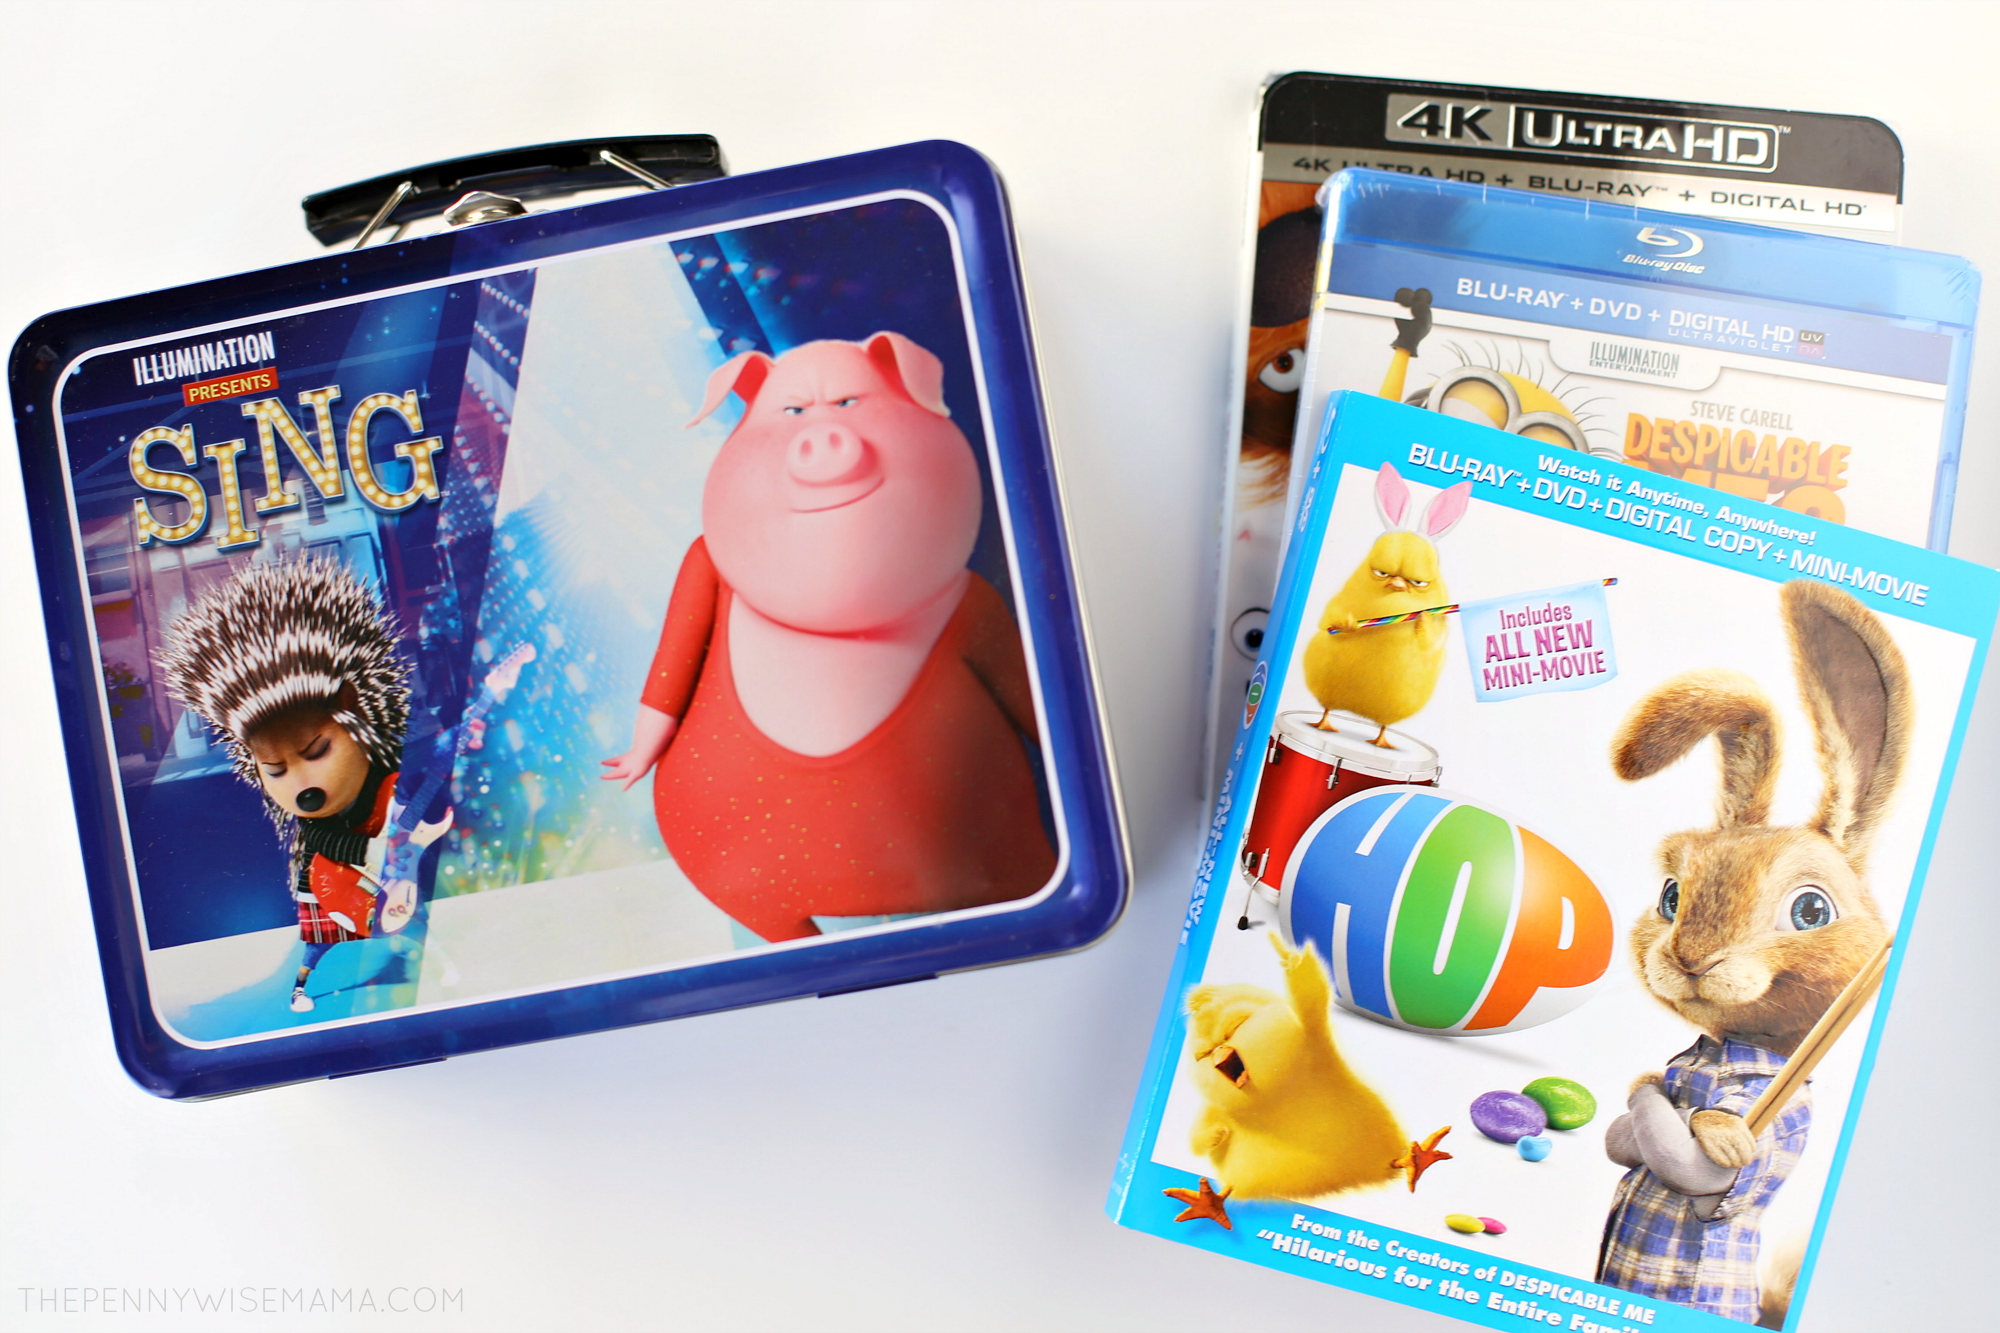 Free Sing Lunchbox at Best Buy